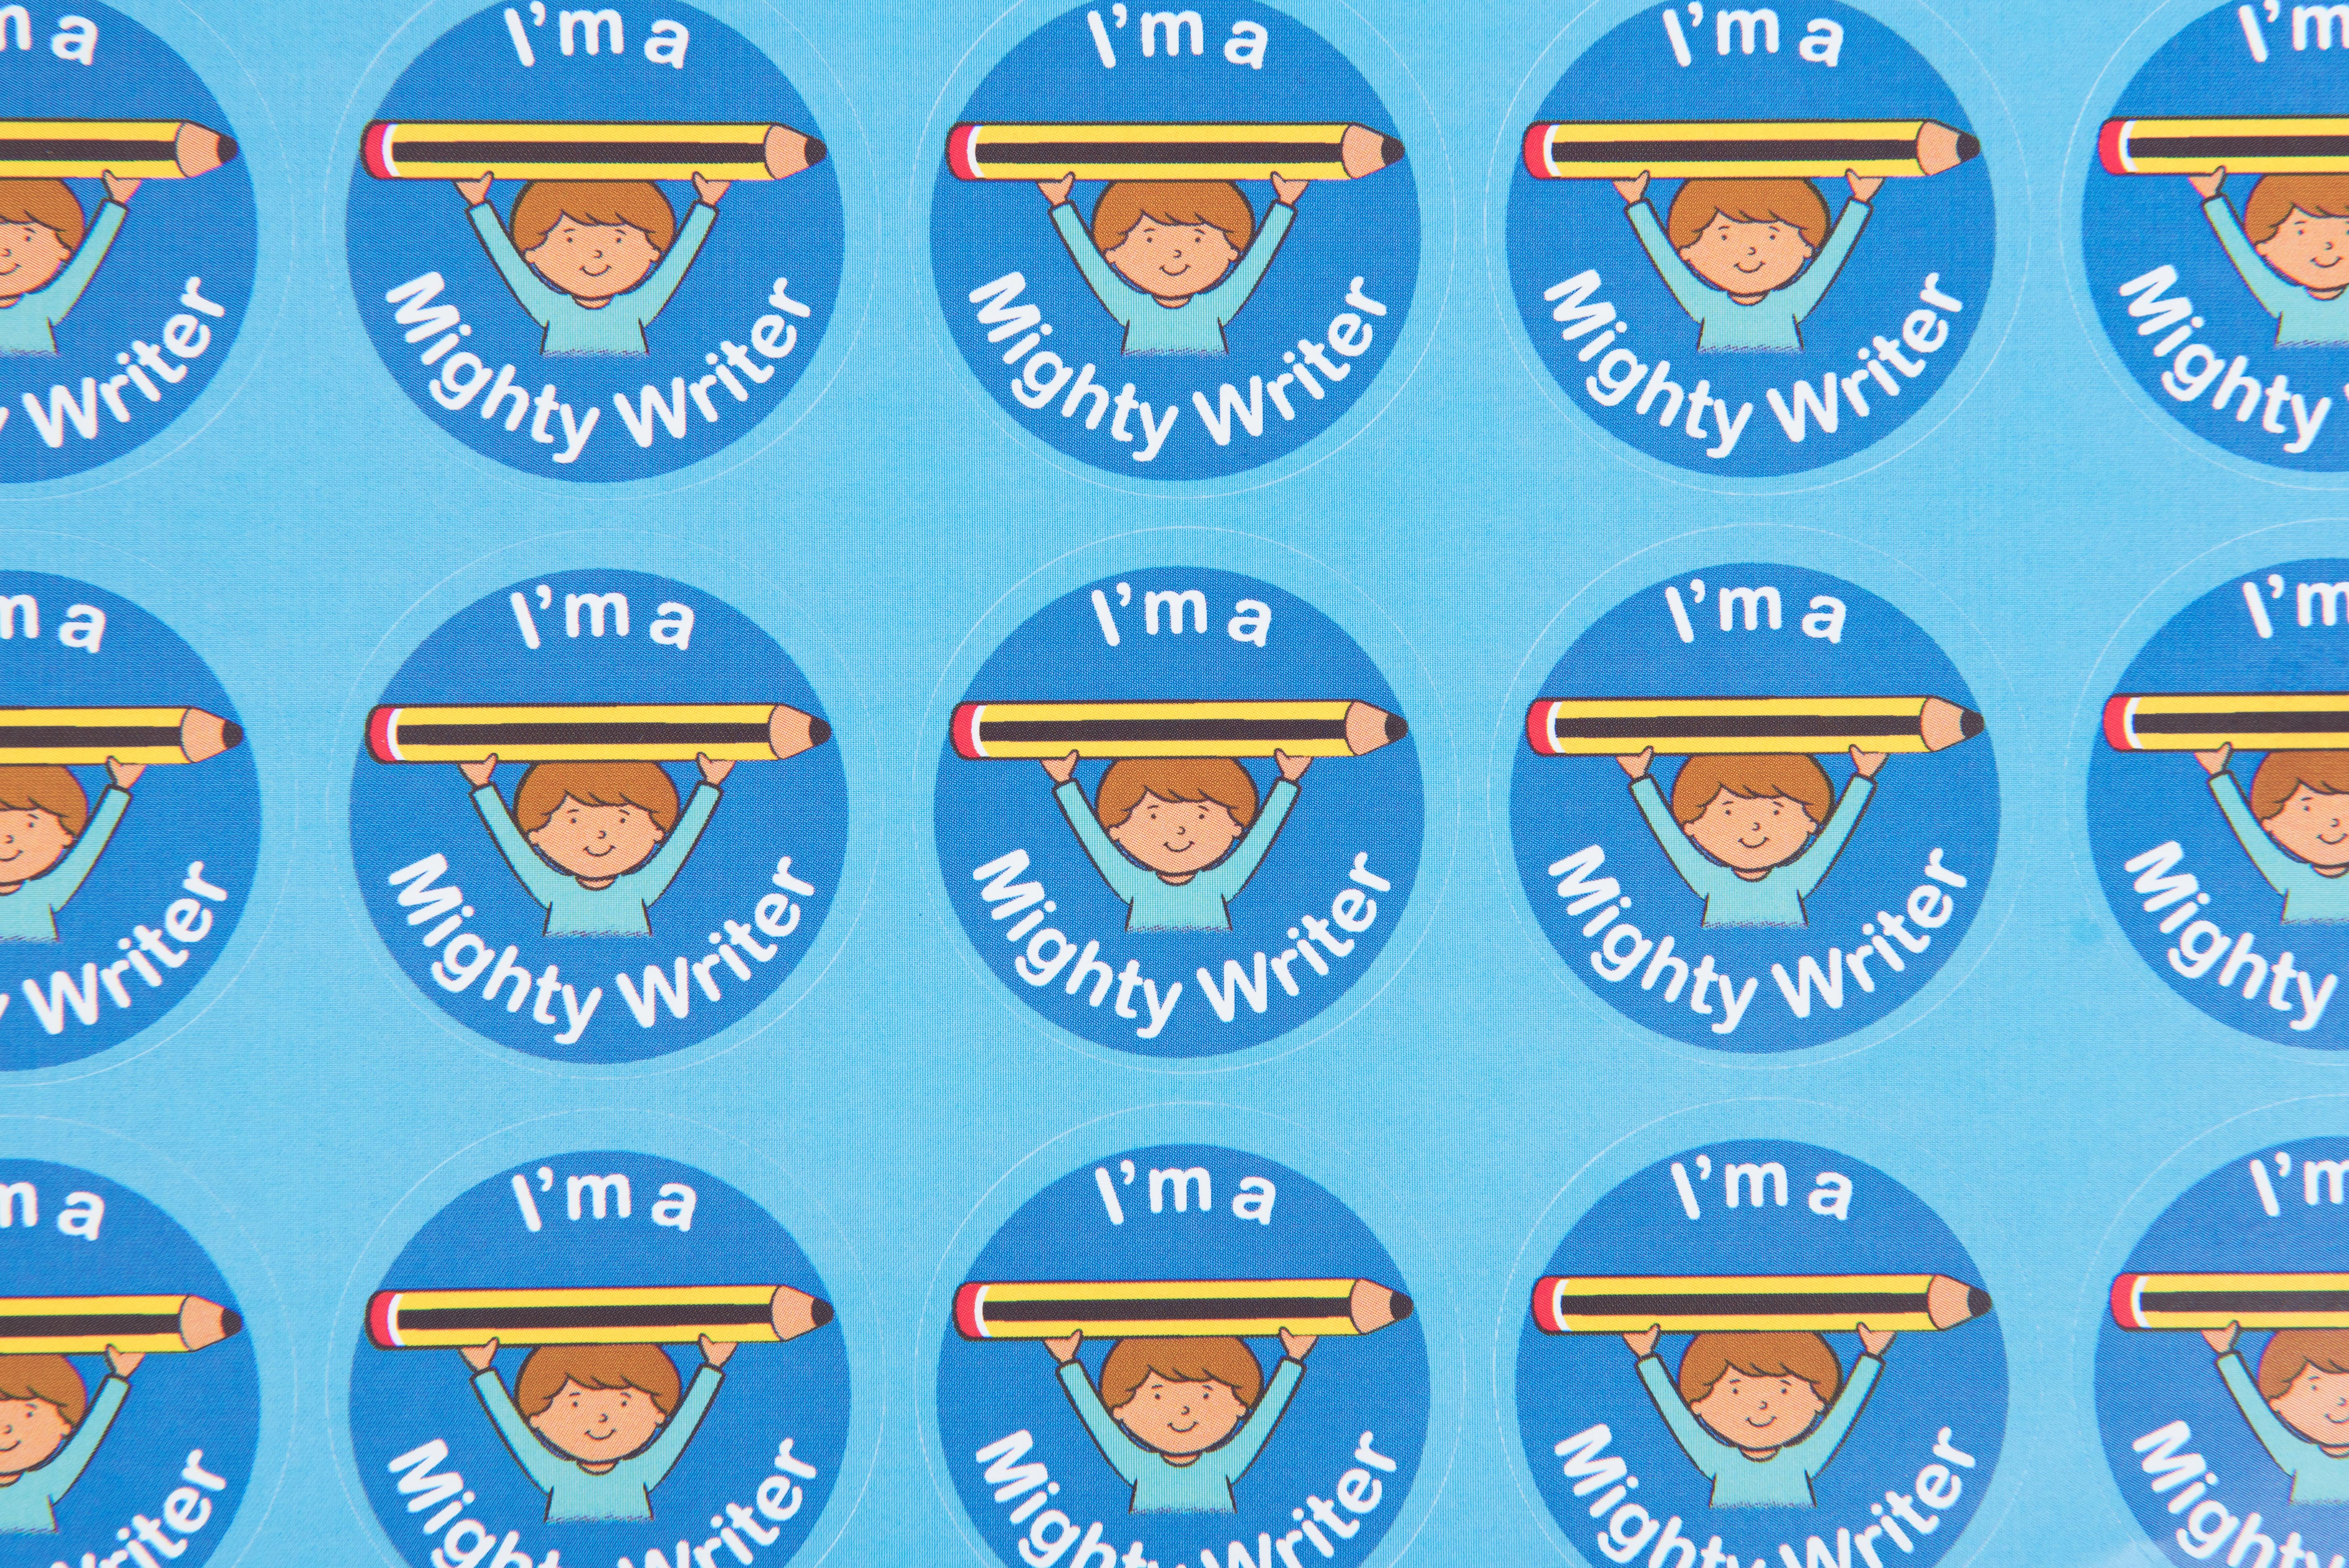 Mighty-Writer Stickers